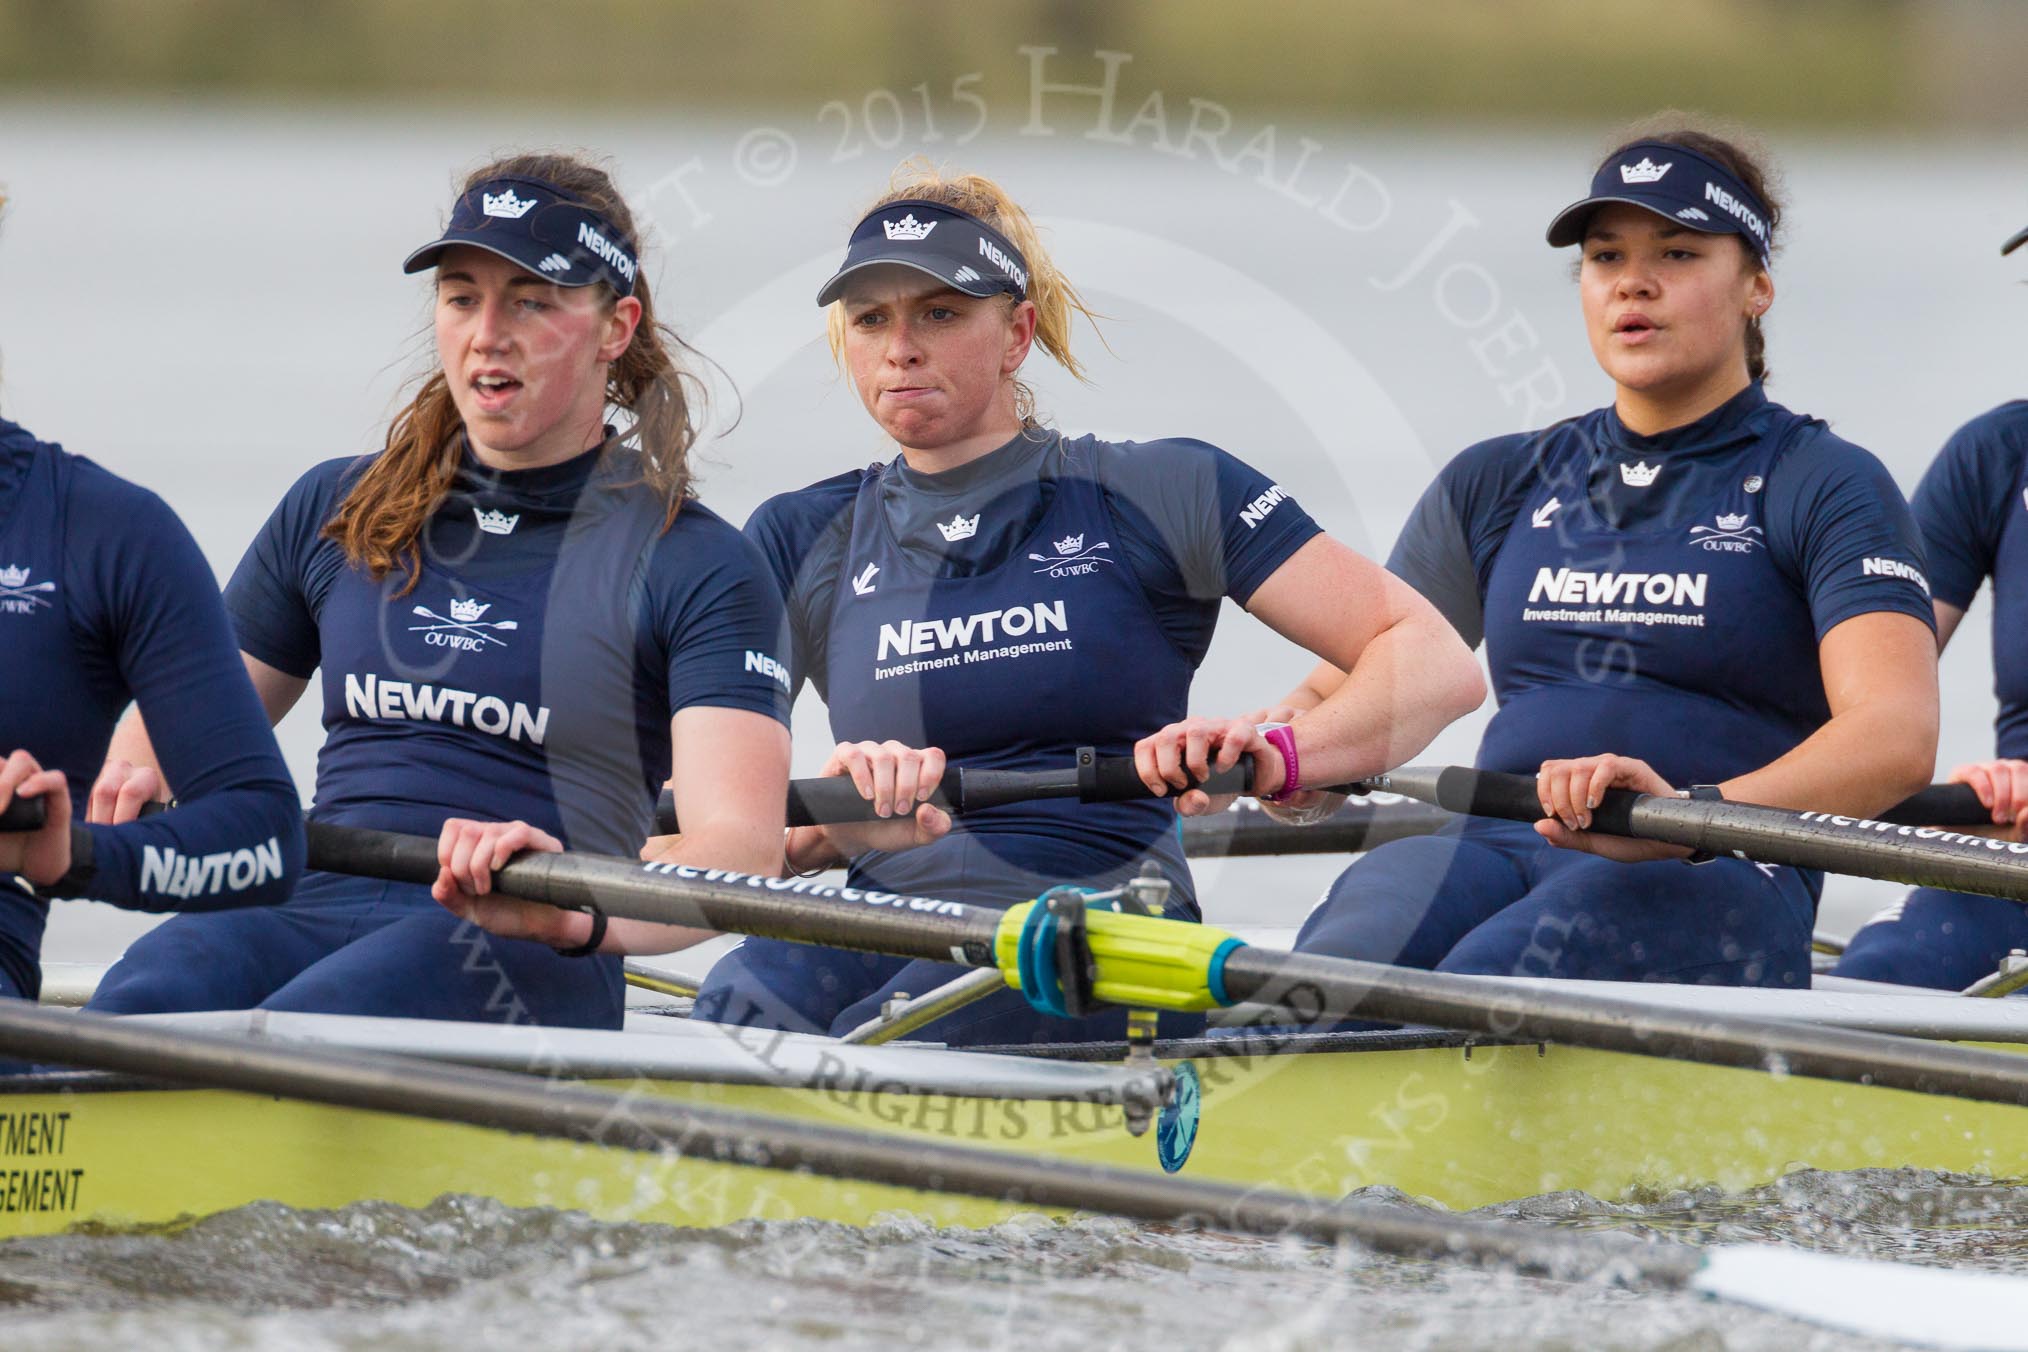 The Boat Race season 2016 - Women's Boat Race Trial Eights (OUWBC, Oxford): "Charybdis" , here 5-Ruth Siddorn, 4-Emma Spruce, 3-Lara Pysden.
River Thames between Putney Bridge and Mortlake,
London SW15,

United Kingdom,
on 10 December 2015 at 12:26, image #214